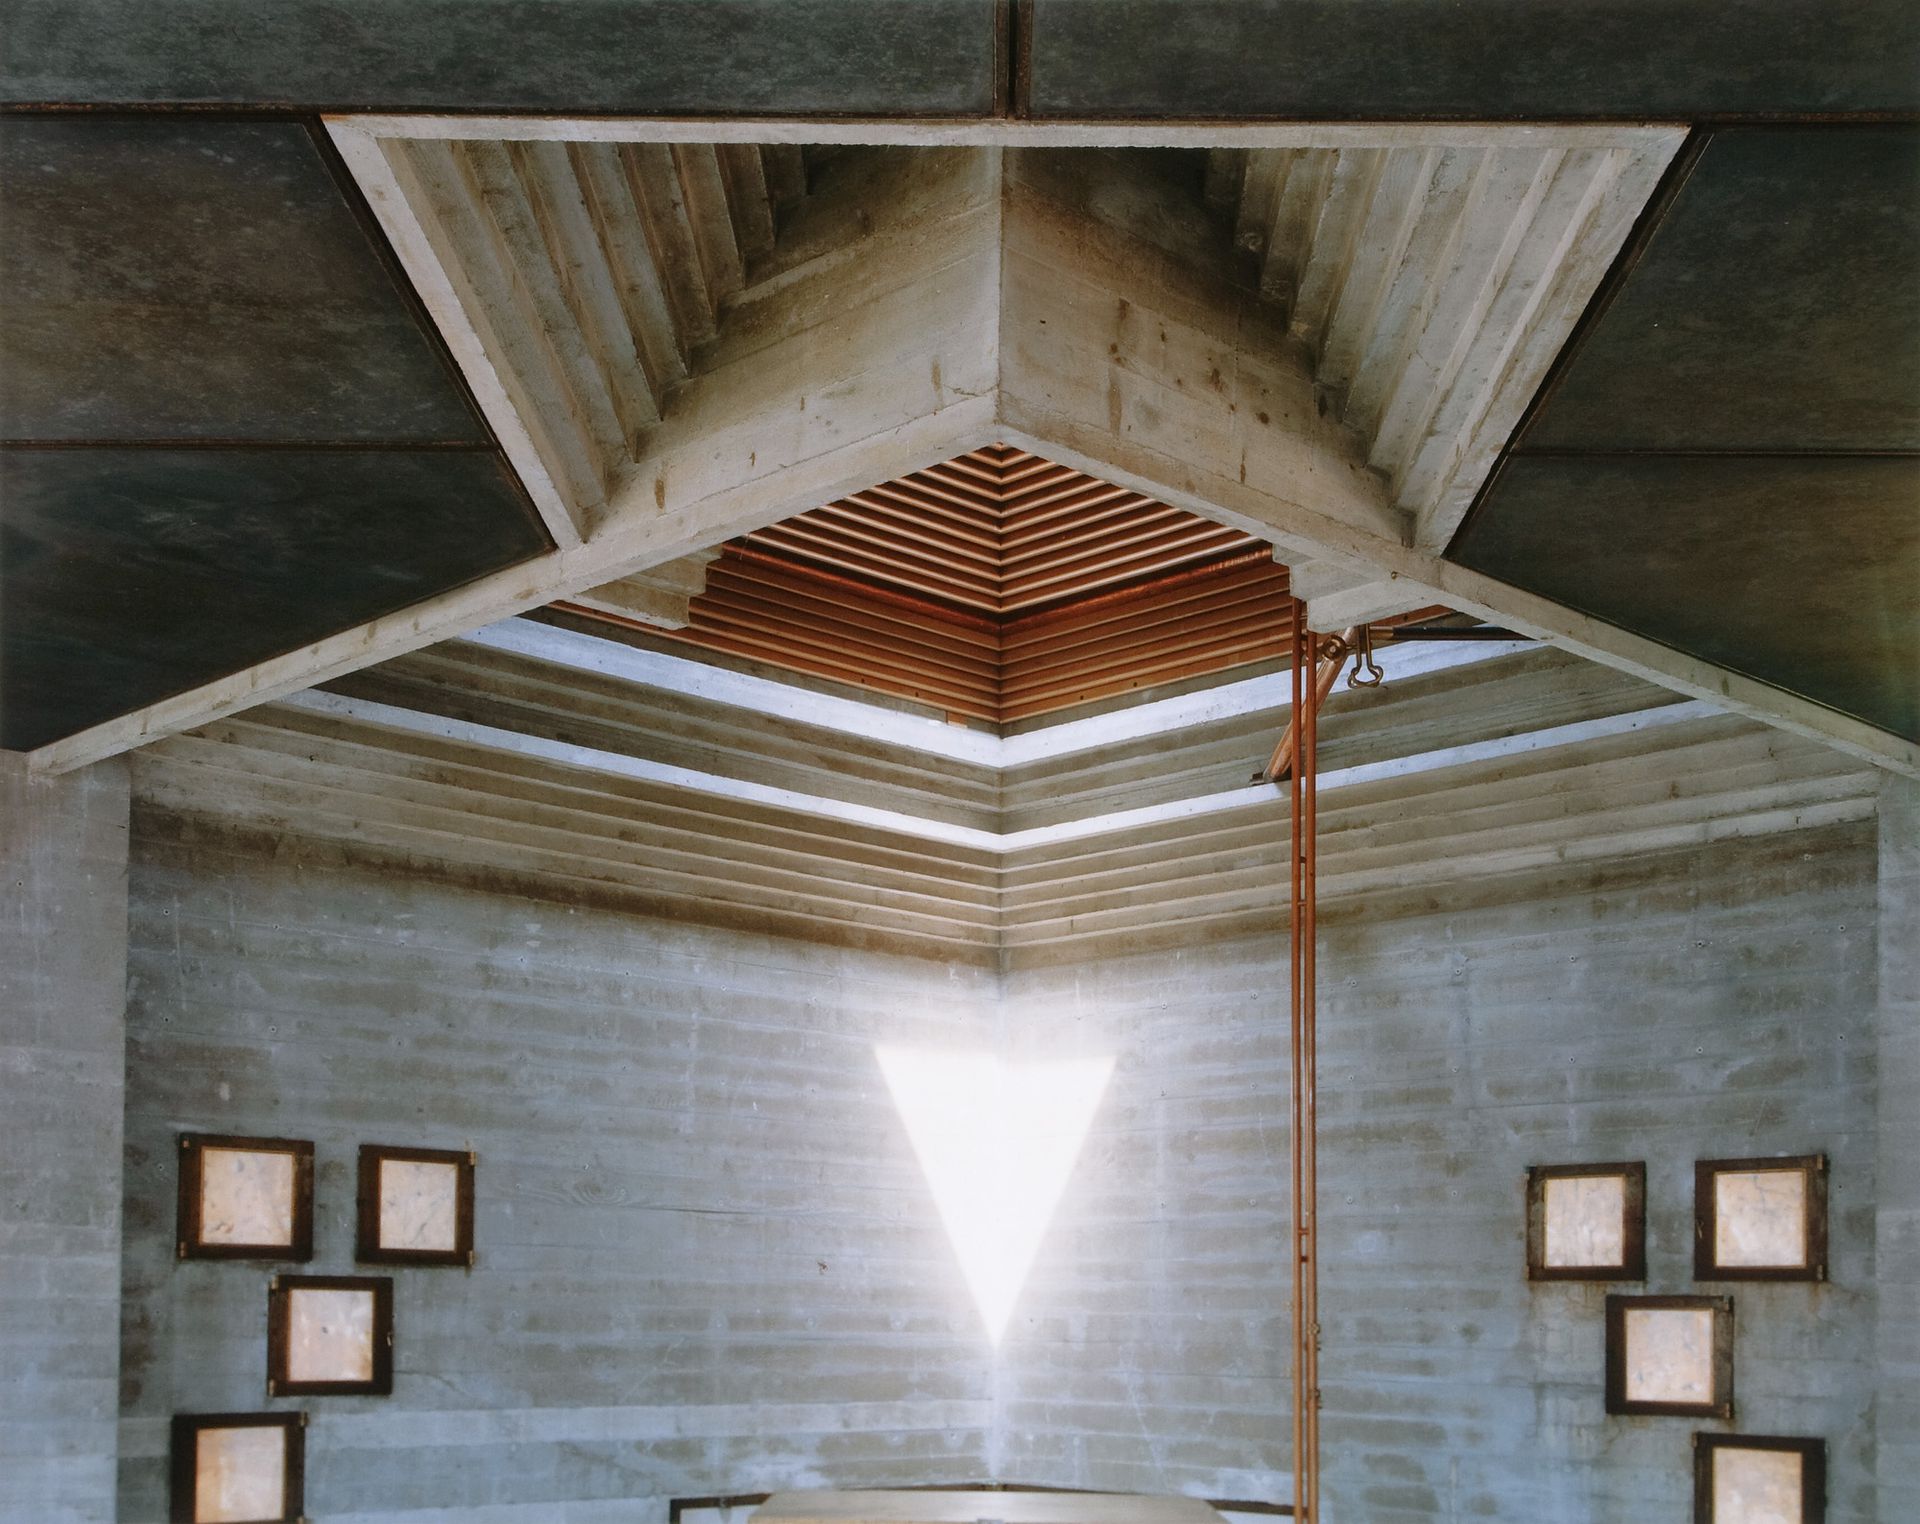 Carlo Scarpa's Tomba Brion: Photographs by Guido Guidi, 1997-2007